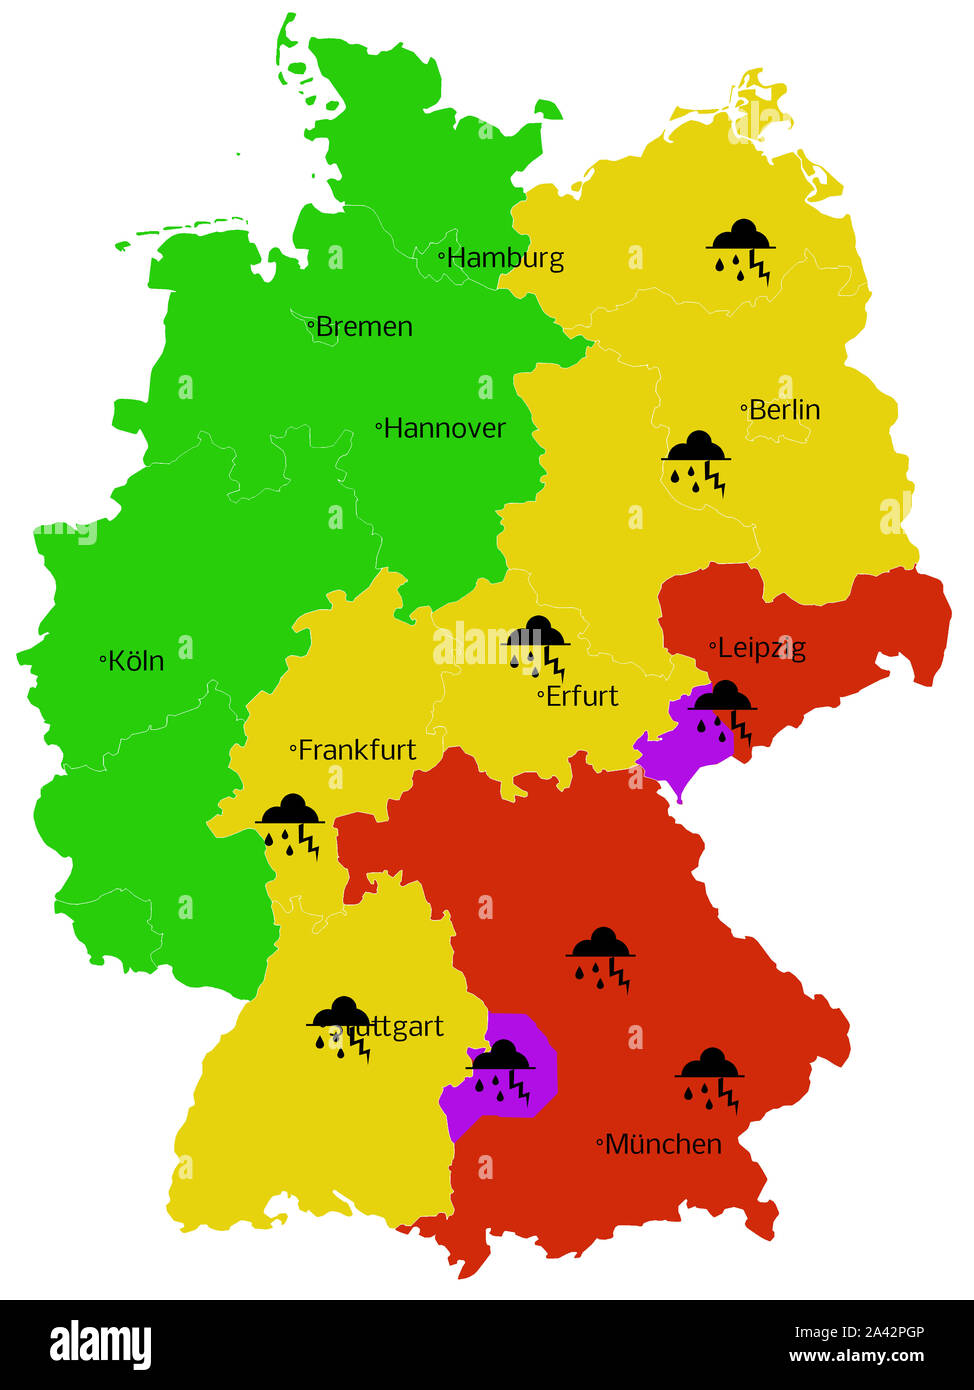 Bad weather Map of Germany Stock Photo